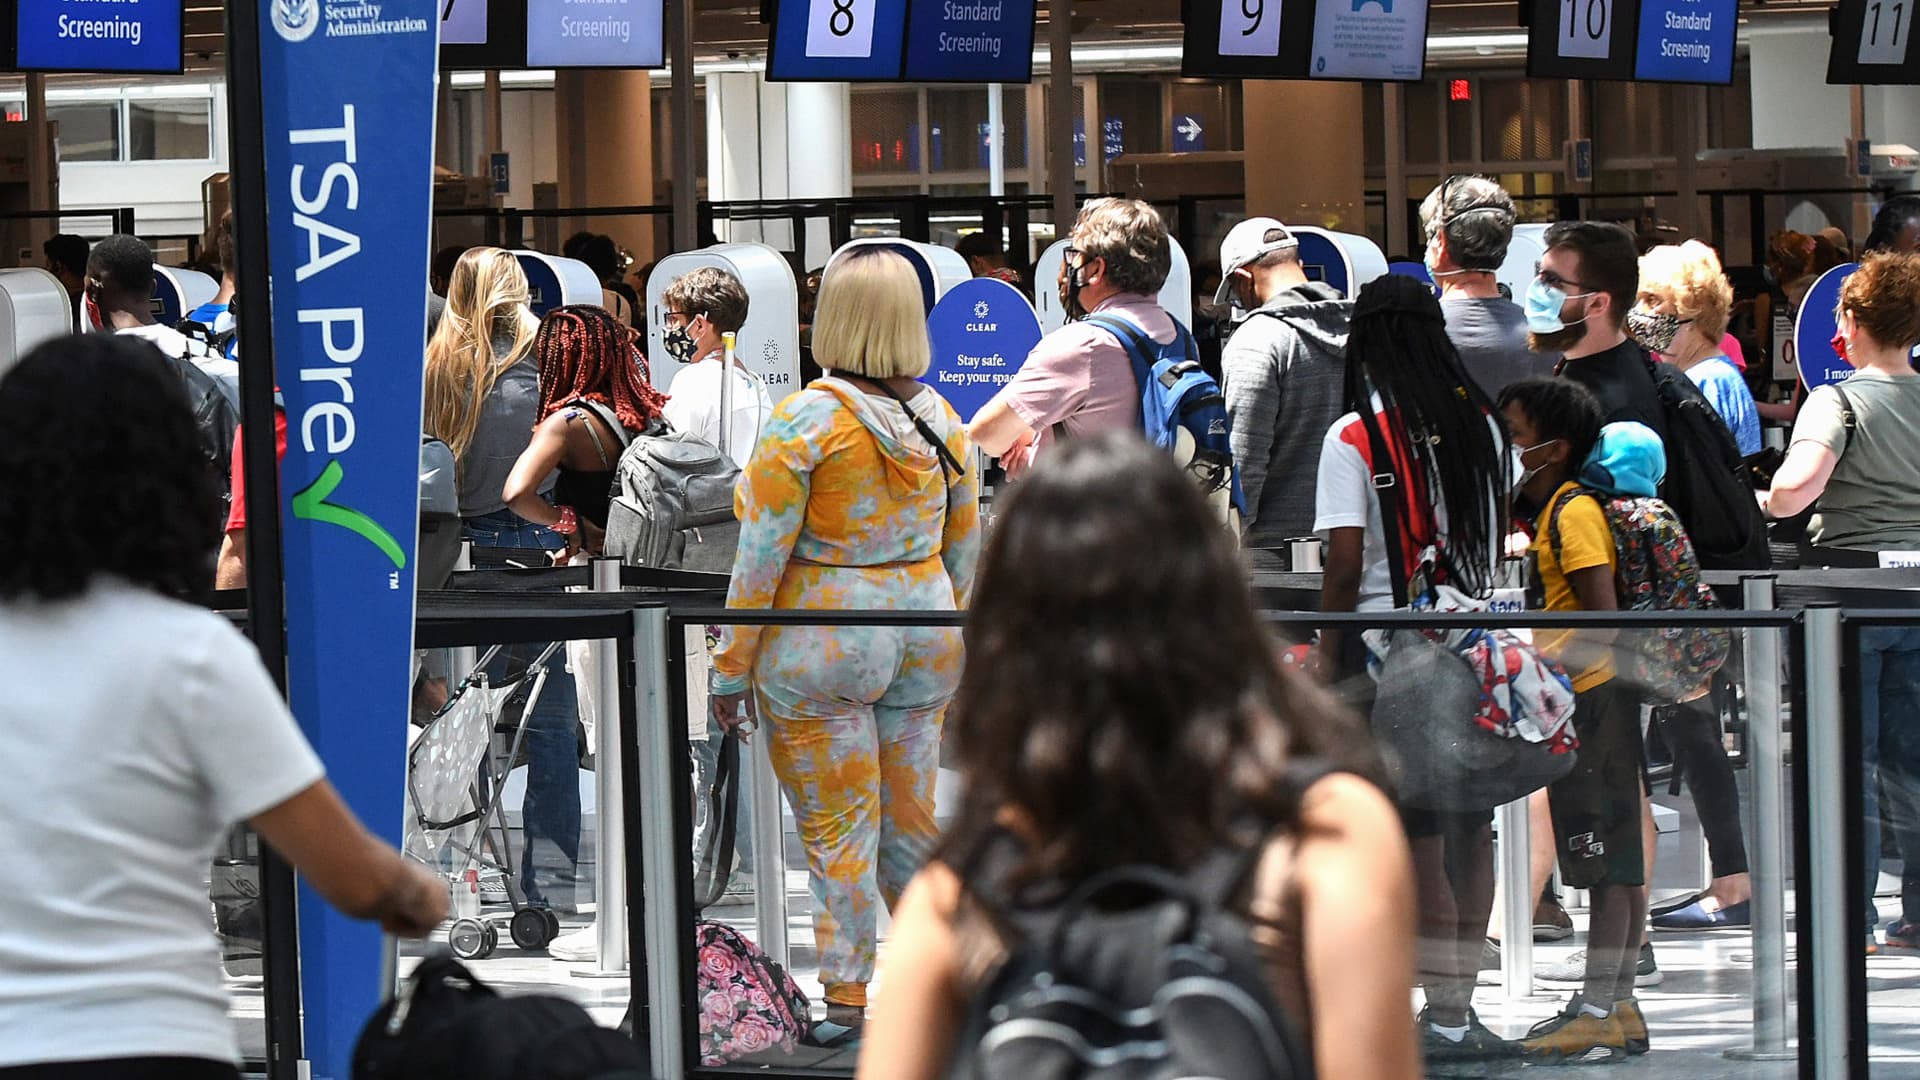 Travelers wait in line at a Transportation Security Administration (TSA) screening checkpoint at Orlando International Airport in May, 2021.